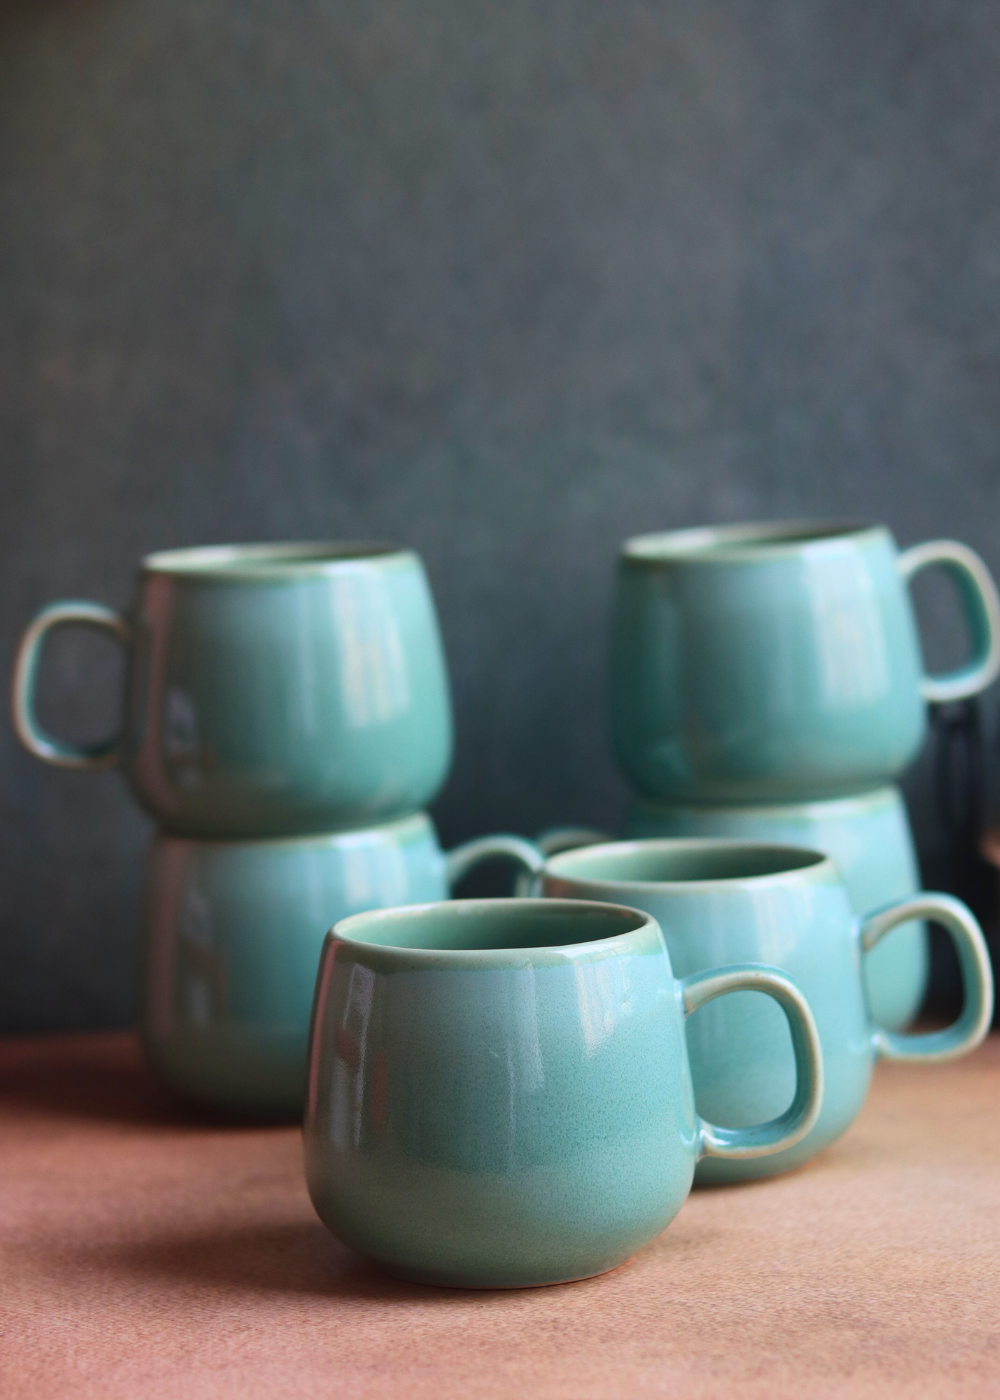 handmade teal cups made by pure ceramic 